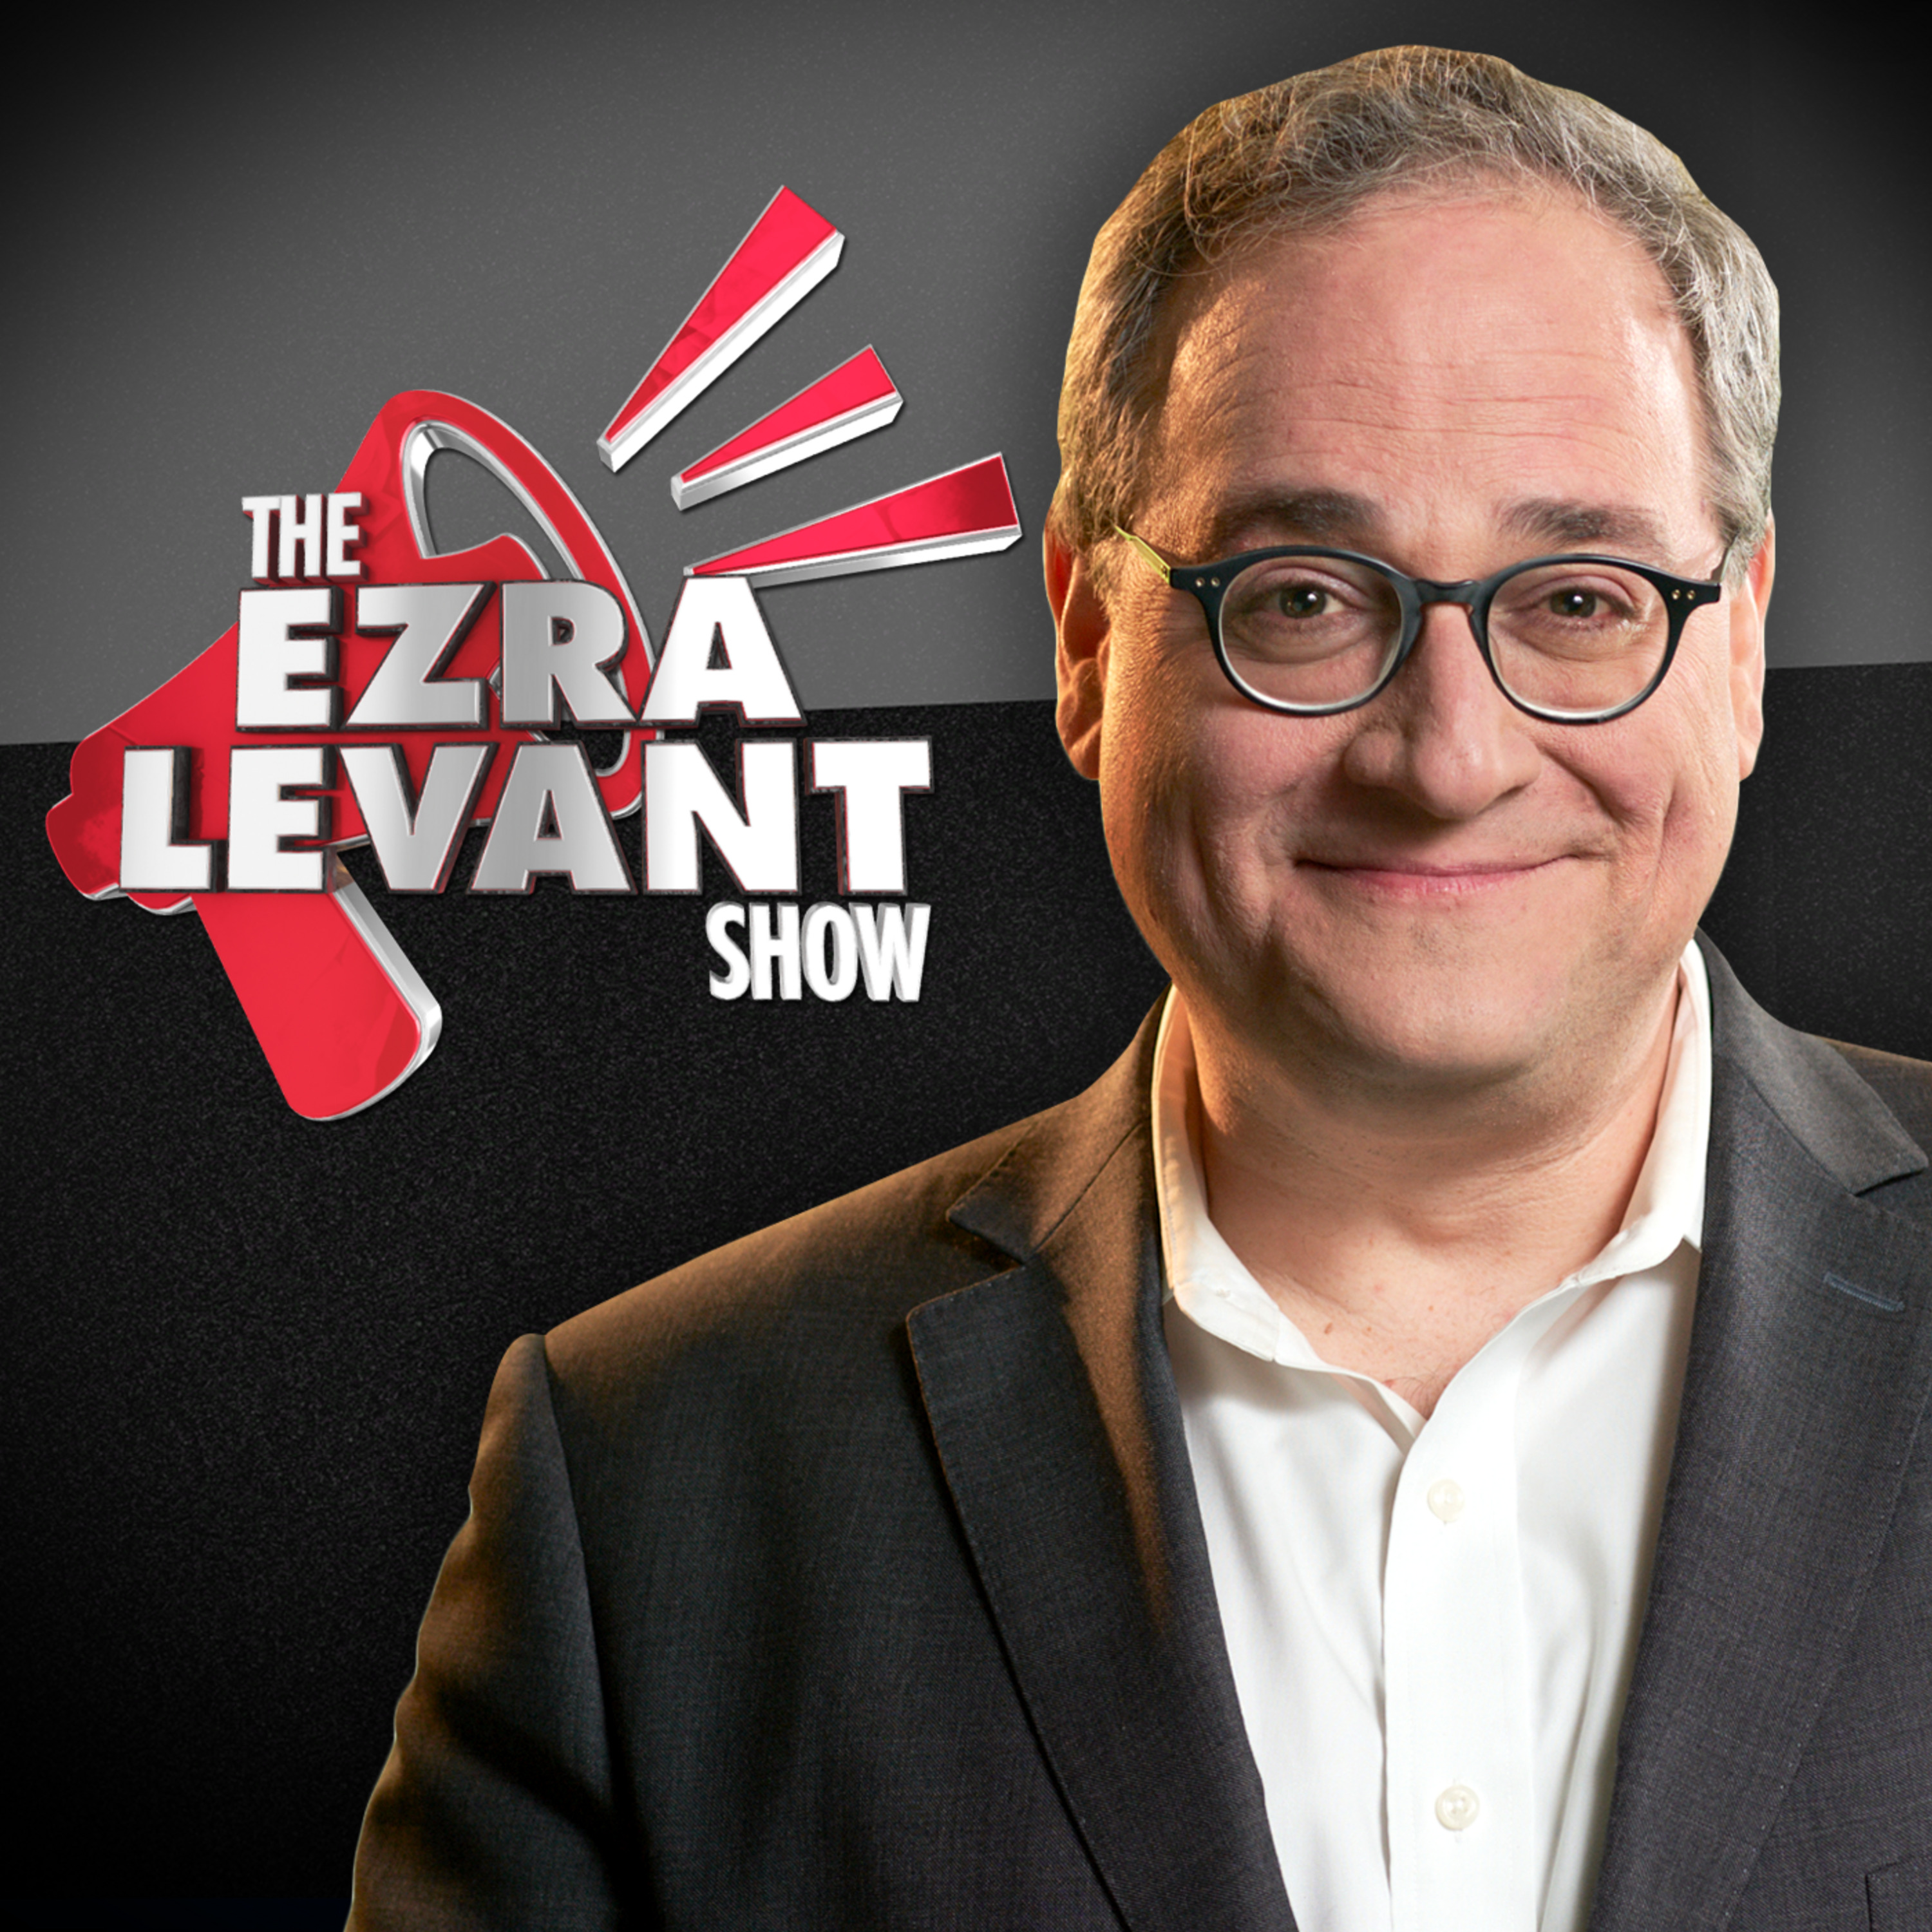 EZRA LEVANT | An in-depth look at Alberta ahead of the UCP vote to decide the next premier